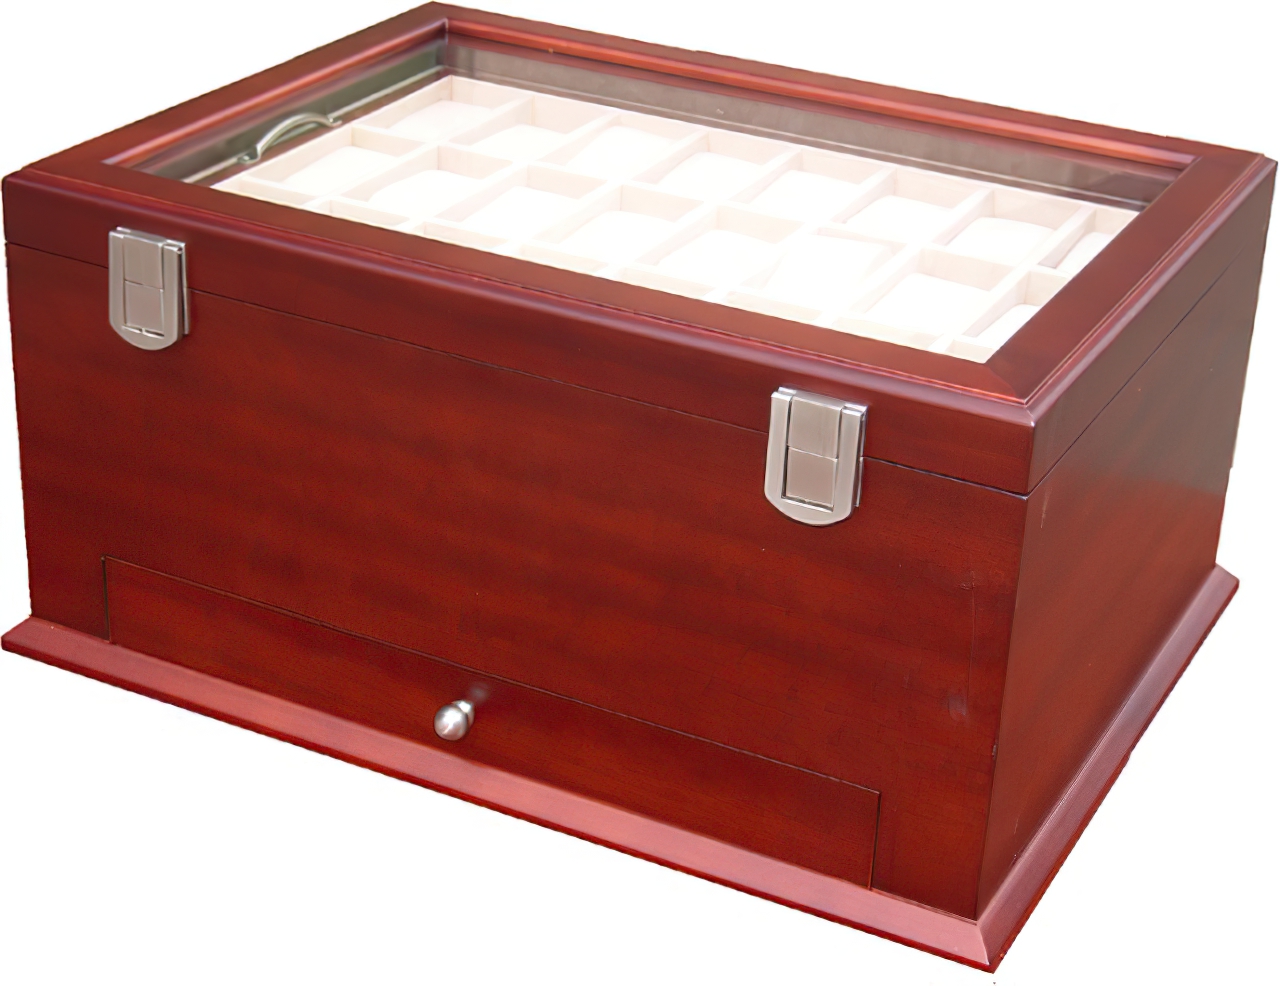   Watch wooden box for 54 watches with Glass 